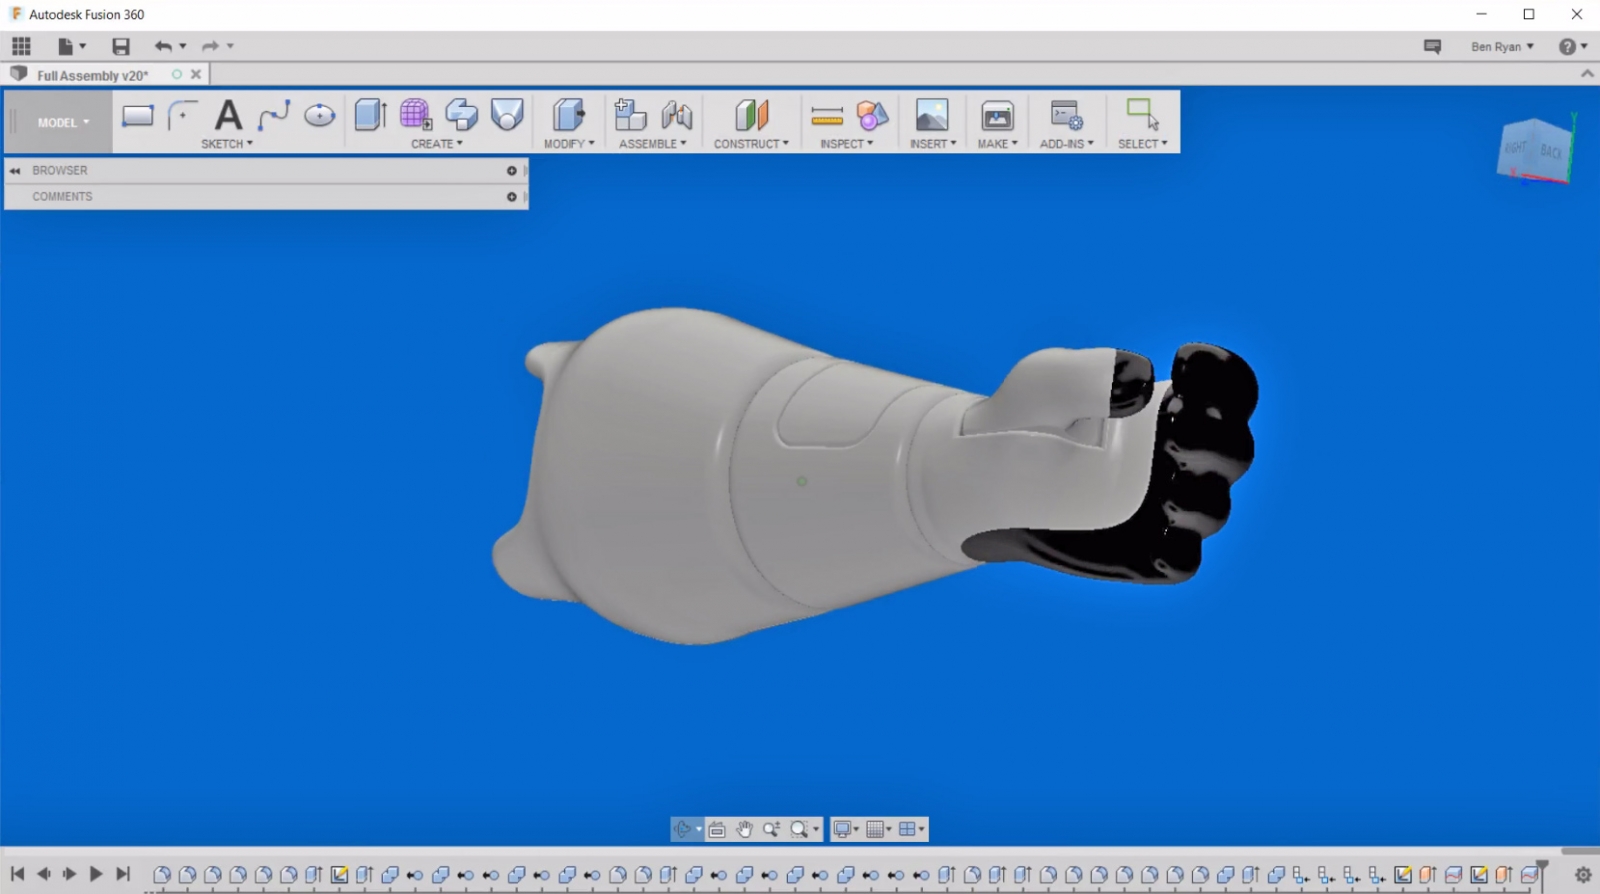 Ambionics Arm being designed in Autodesk Fusion360